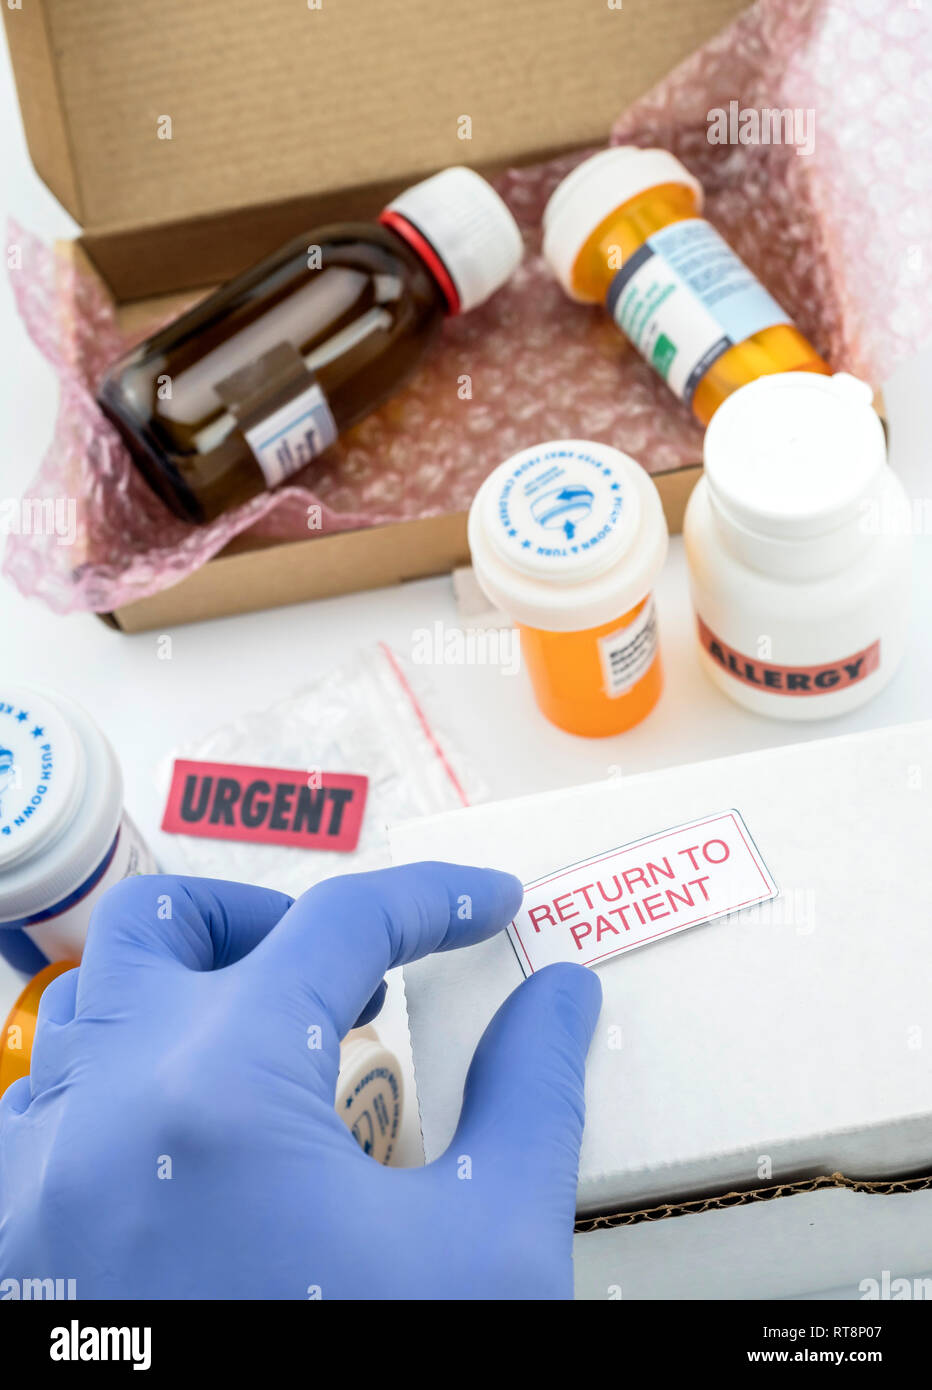 Nurse unpacking medication in boxes, pasting label return to the patient, conceptual image, composition vertical Stock Photo